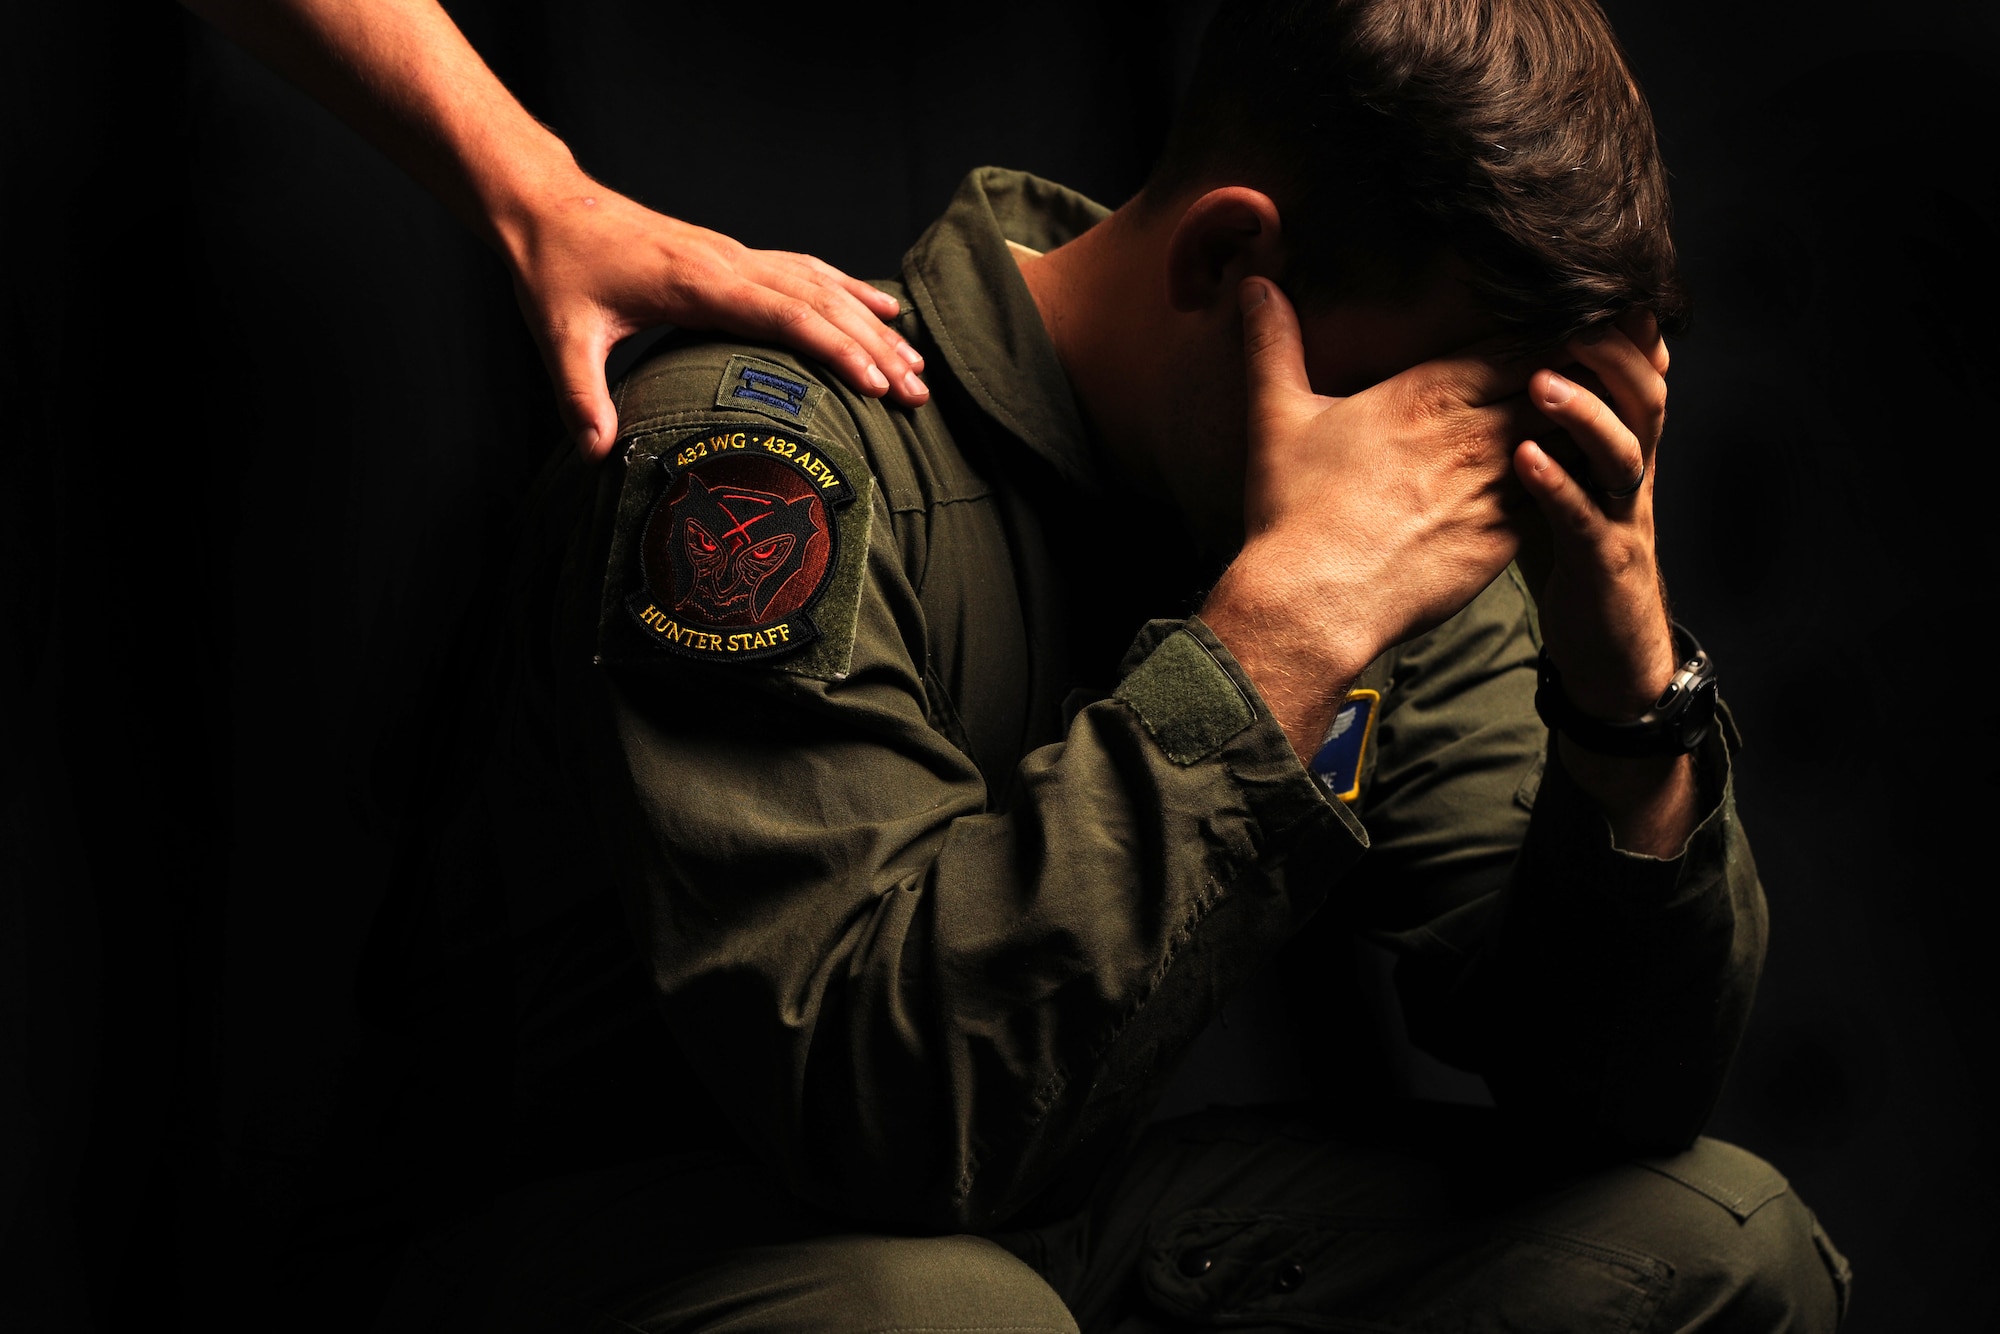 Myth: Everyone in the RPA community suffers from Post-Traumatic Stress Disorder.

Fact: According to a 2014 paper from the United Air Force School of Aerospace Medicine, studies have shown that 4.3 percent of Air Force RPA operators report symptoms of post-traumatic stress disorder. This is lower than the 4 to 18% of PTSD reported among those returning from the battlefield and lower than the projected lifetime risk of PTSD for Americans (8.7%, American Psychiatric Association, 2013). In addition, Creech Air Force Base established a Human Performance Team in 2011 comprised of an operational psychologist, an operational and aerospace physiologist, three flight surgeons and two Religious Support Teams to aid Airmen in dealing with stressors.  (U.S. Air Force photo by Tech. Sgt. Nadine Barclay)
